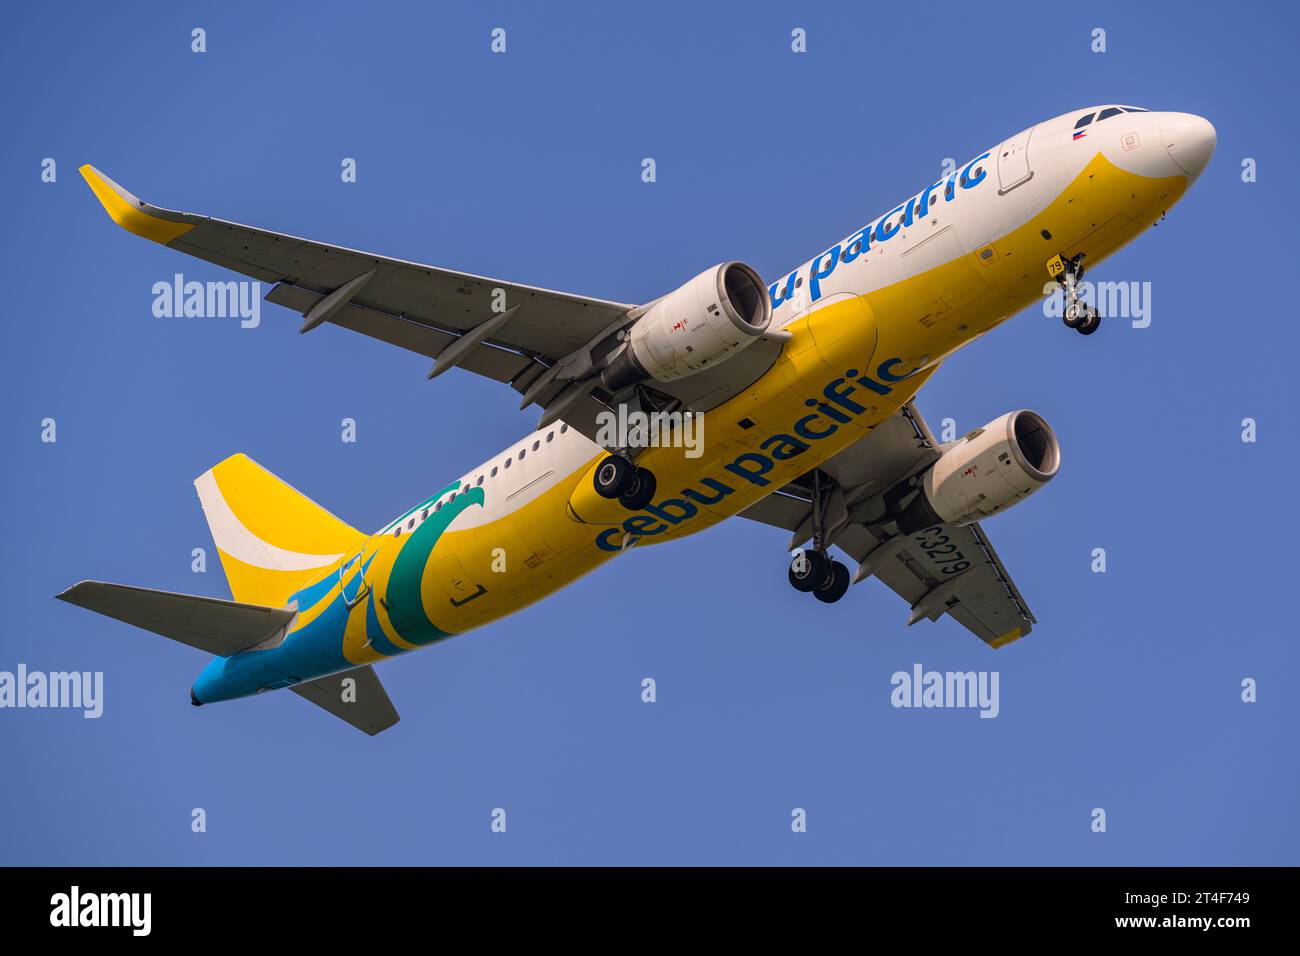 Cebu Pacific Airbus A320-200 on a sunny day landing at Singapore Changi Airport Stock Photo